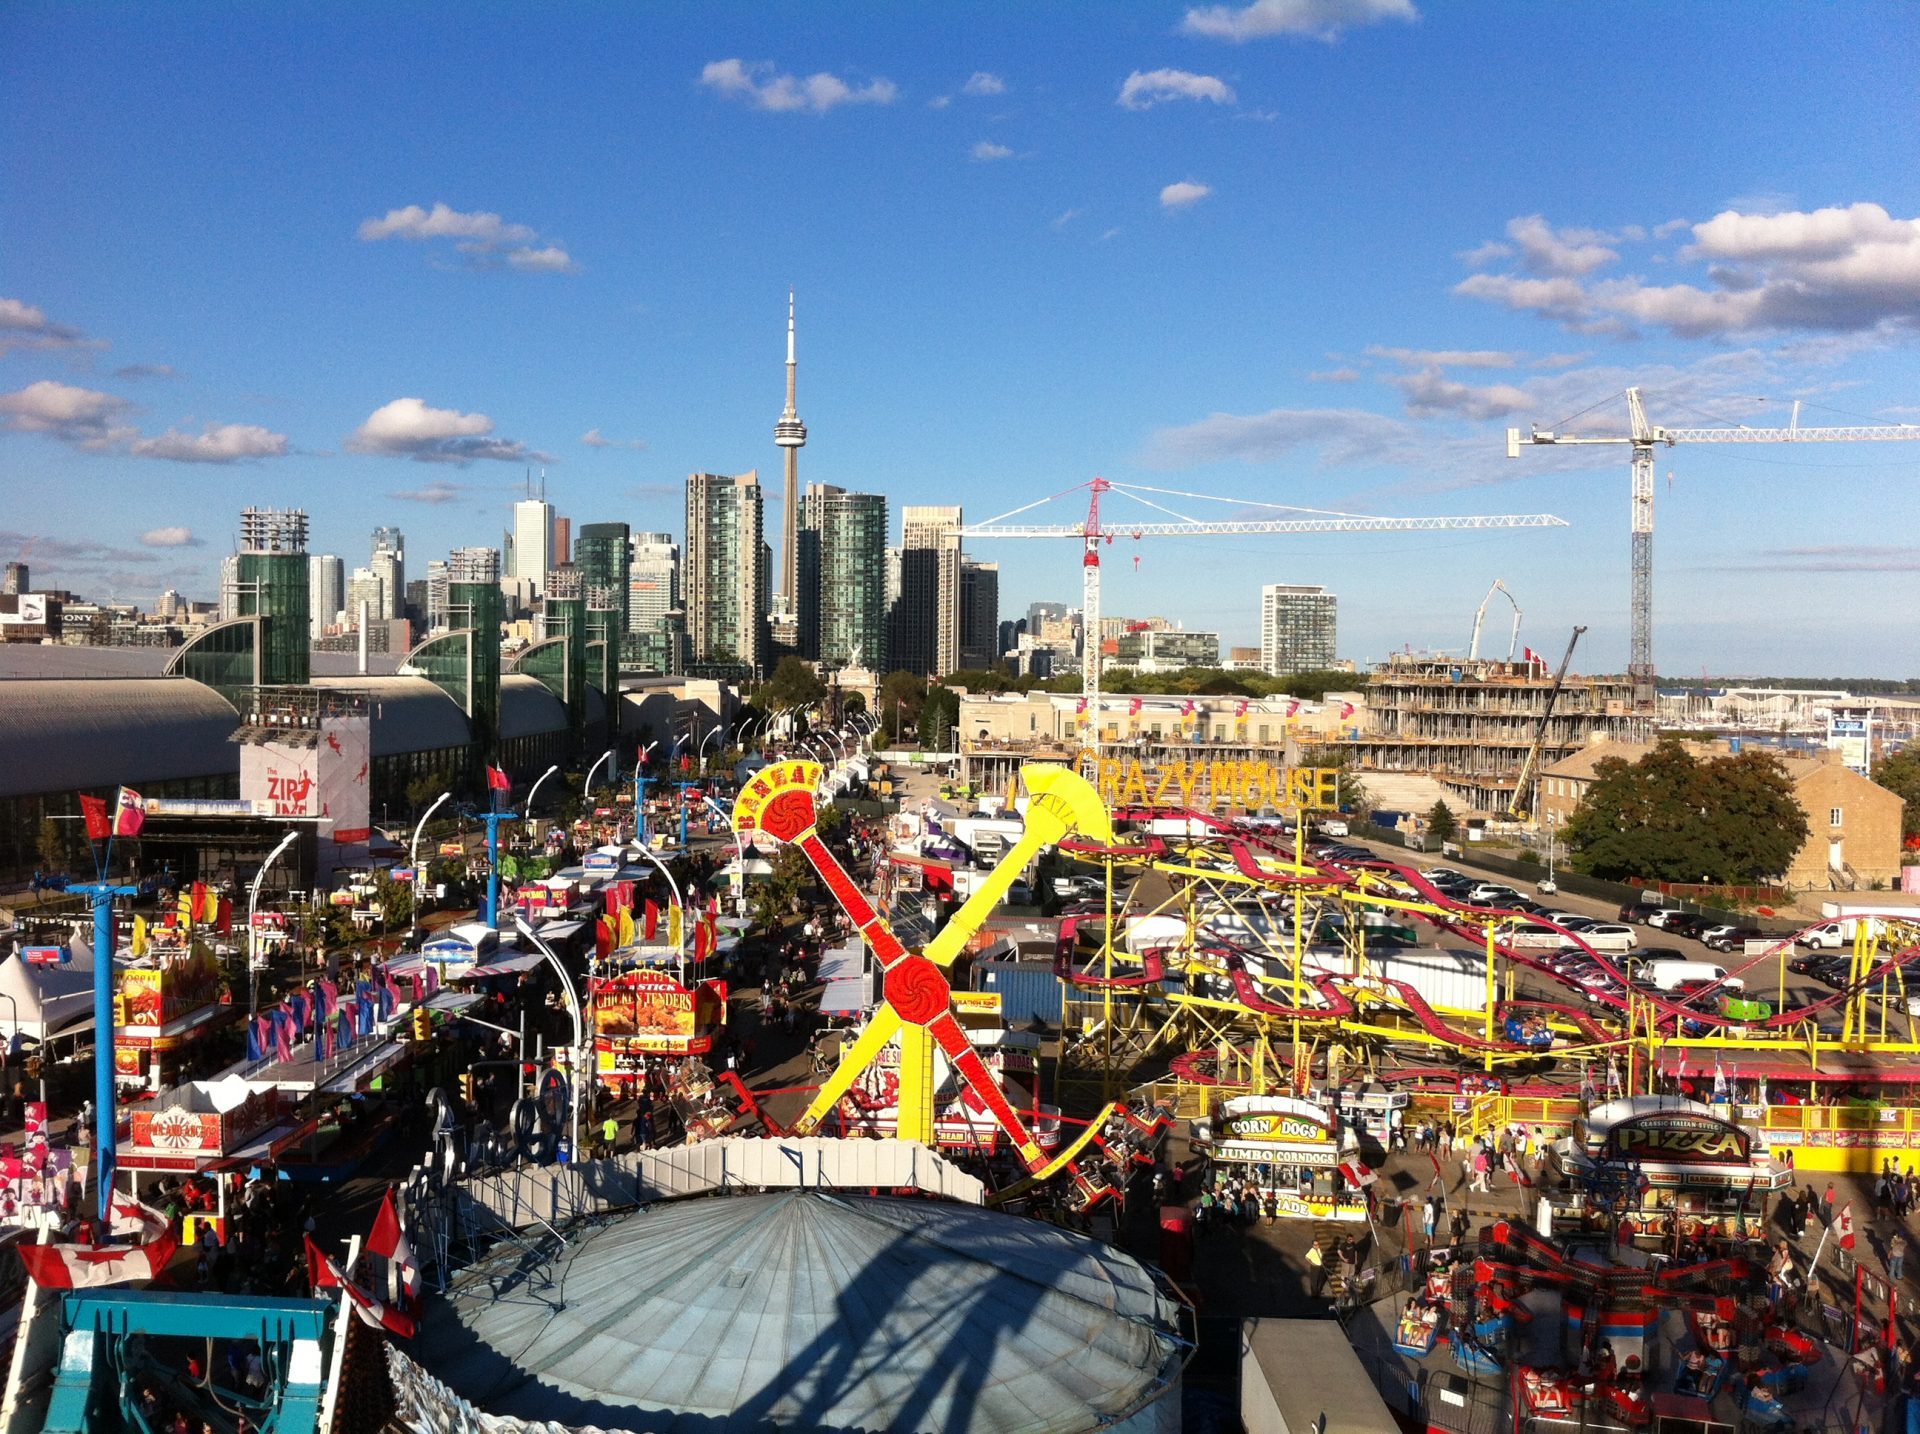 View of Canadian National Exhibition from the cable chair